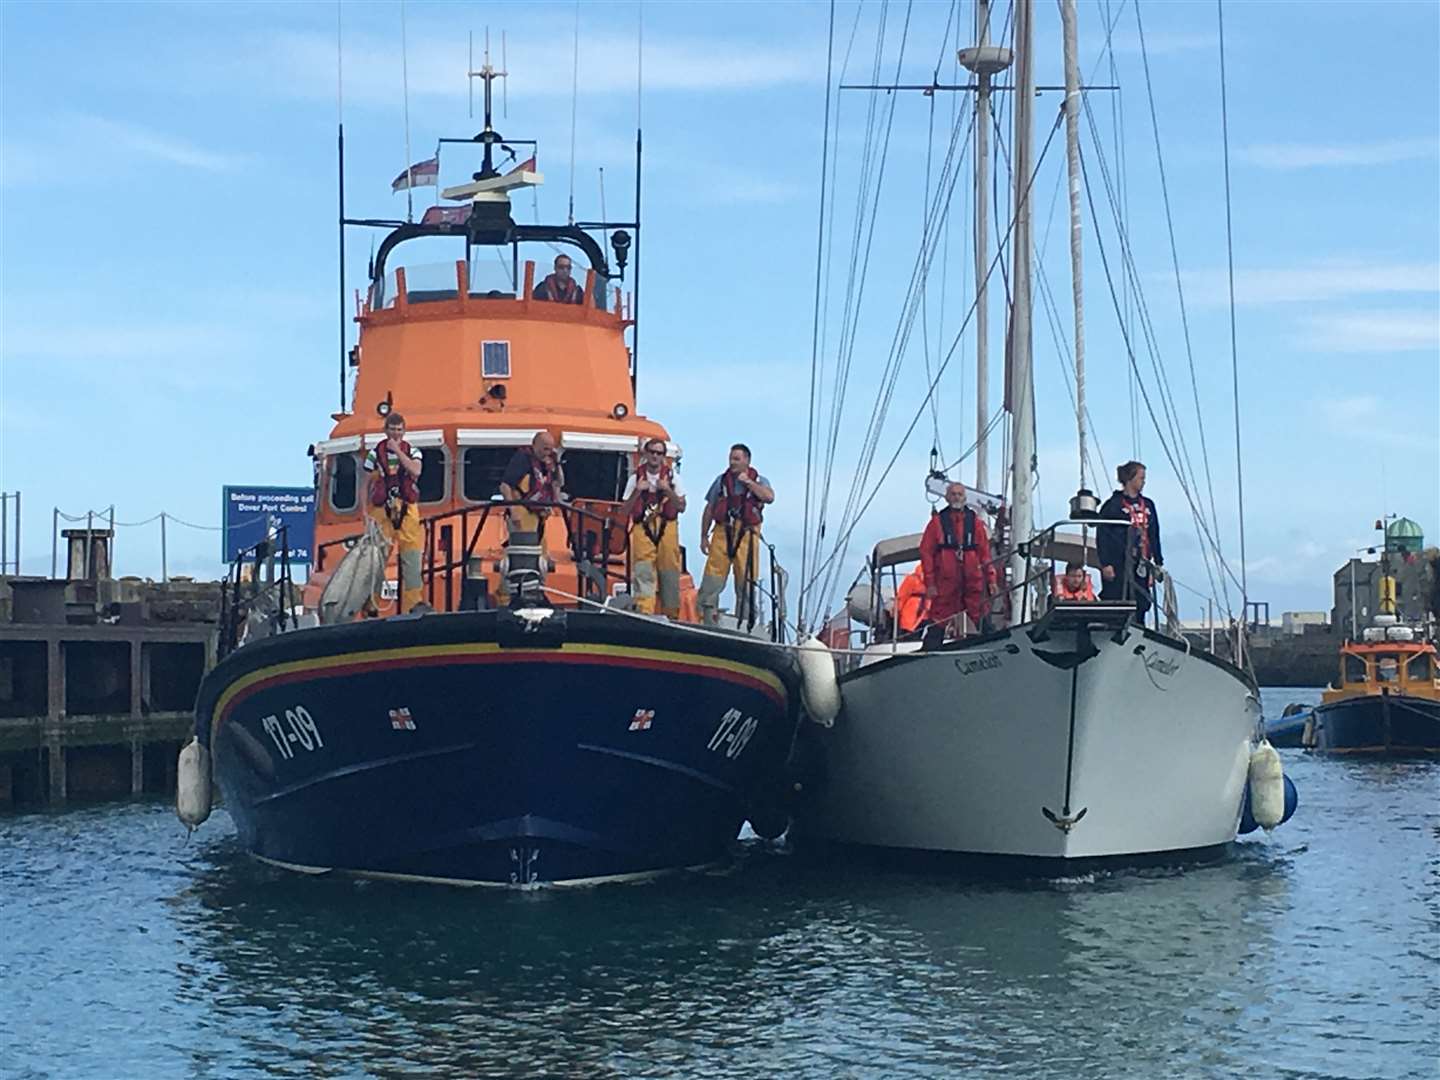 Dover Lifeboat called to rescue a Polish sailing boat with 11 crew